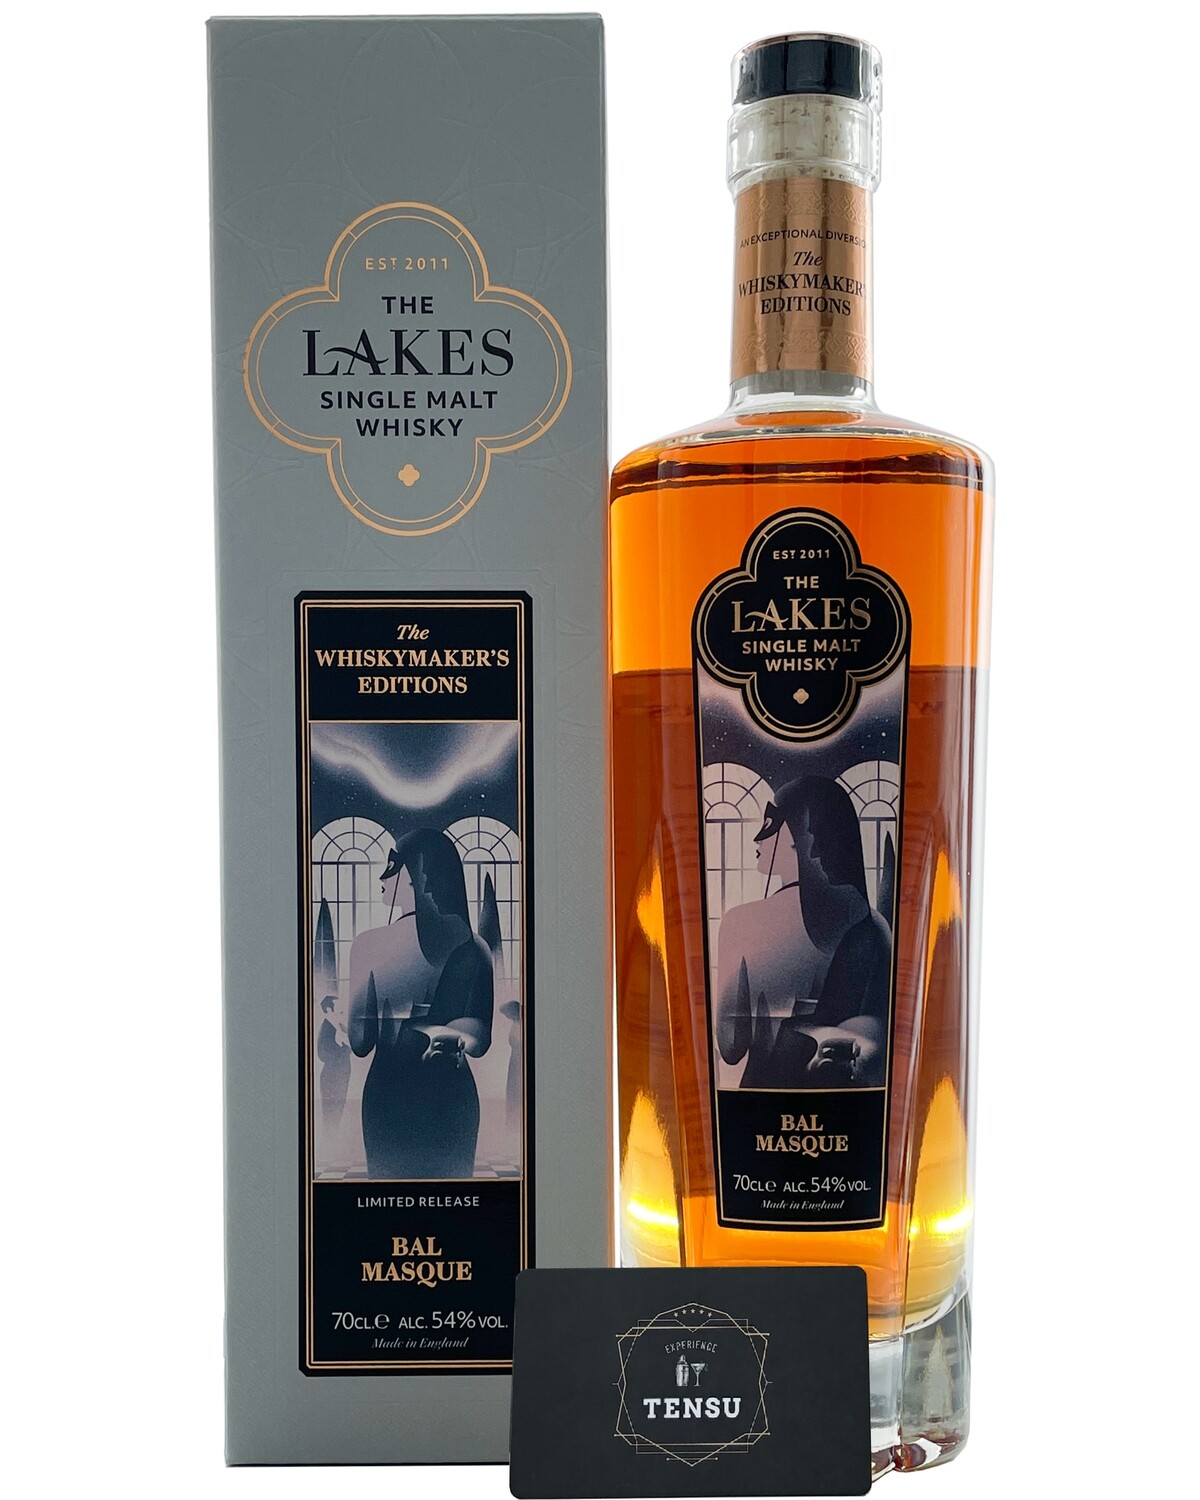 The Lakes - The Whiskymaker's Editions - Bal Masque 54.0 "The Lakes Distillery"